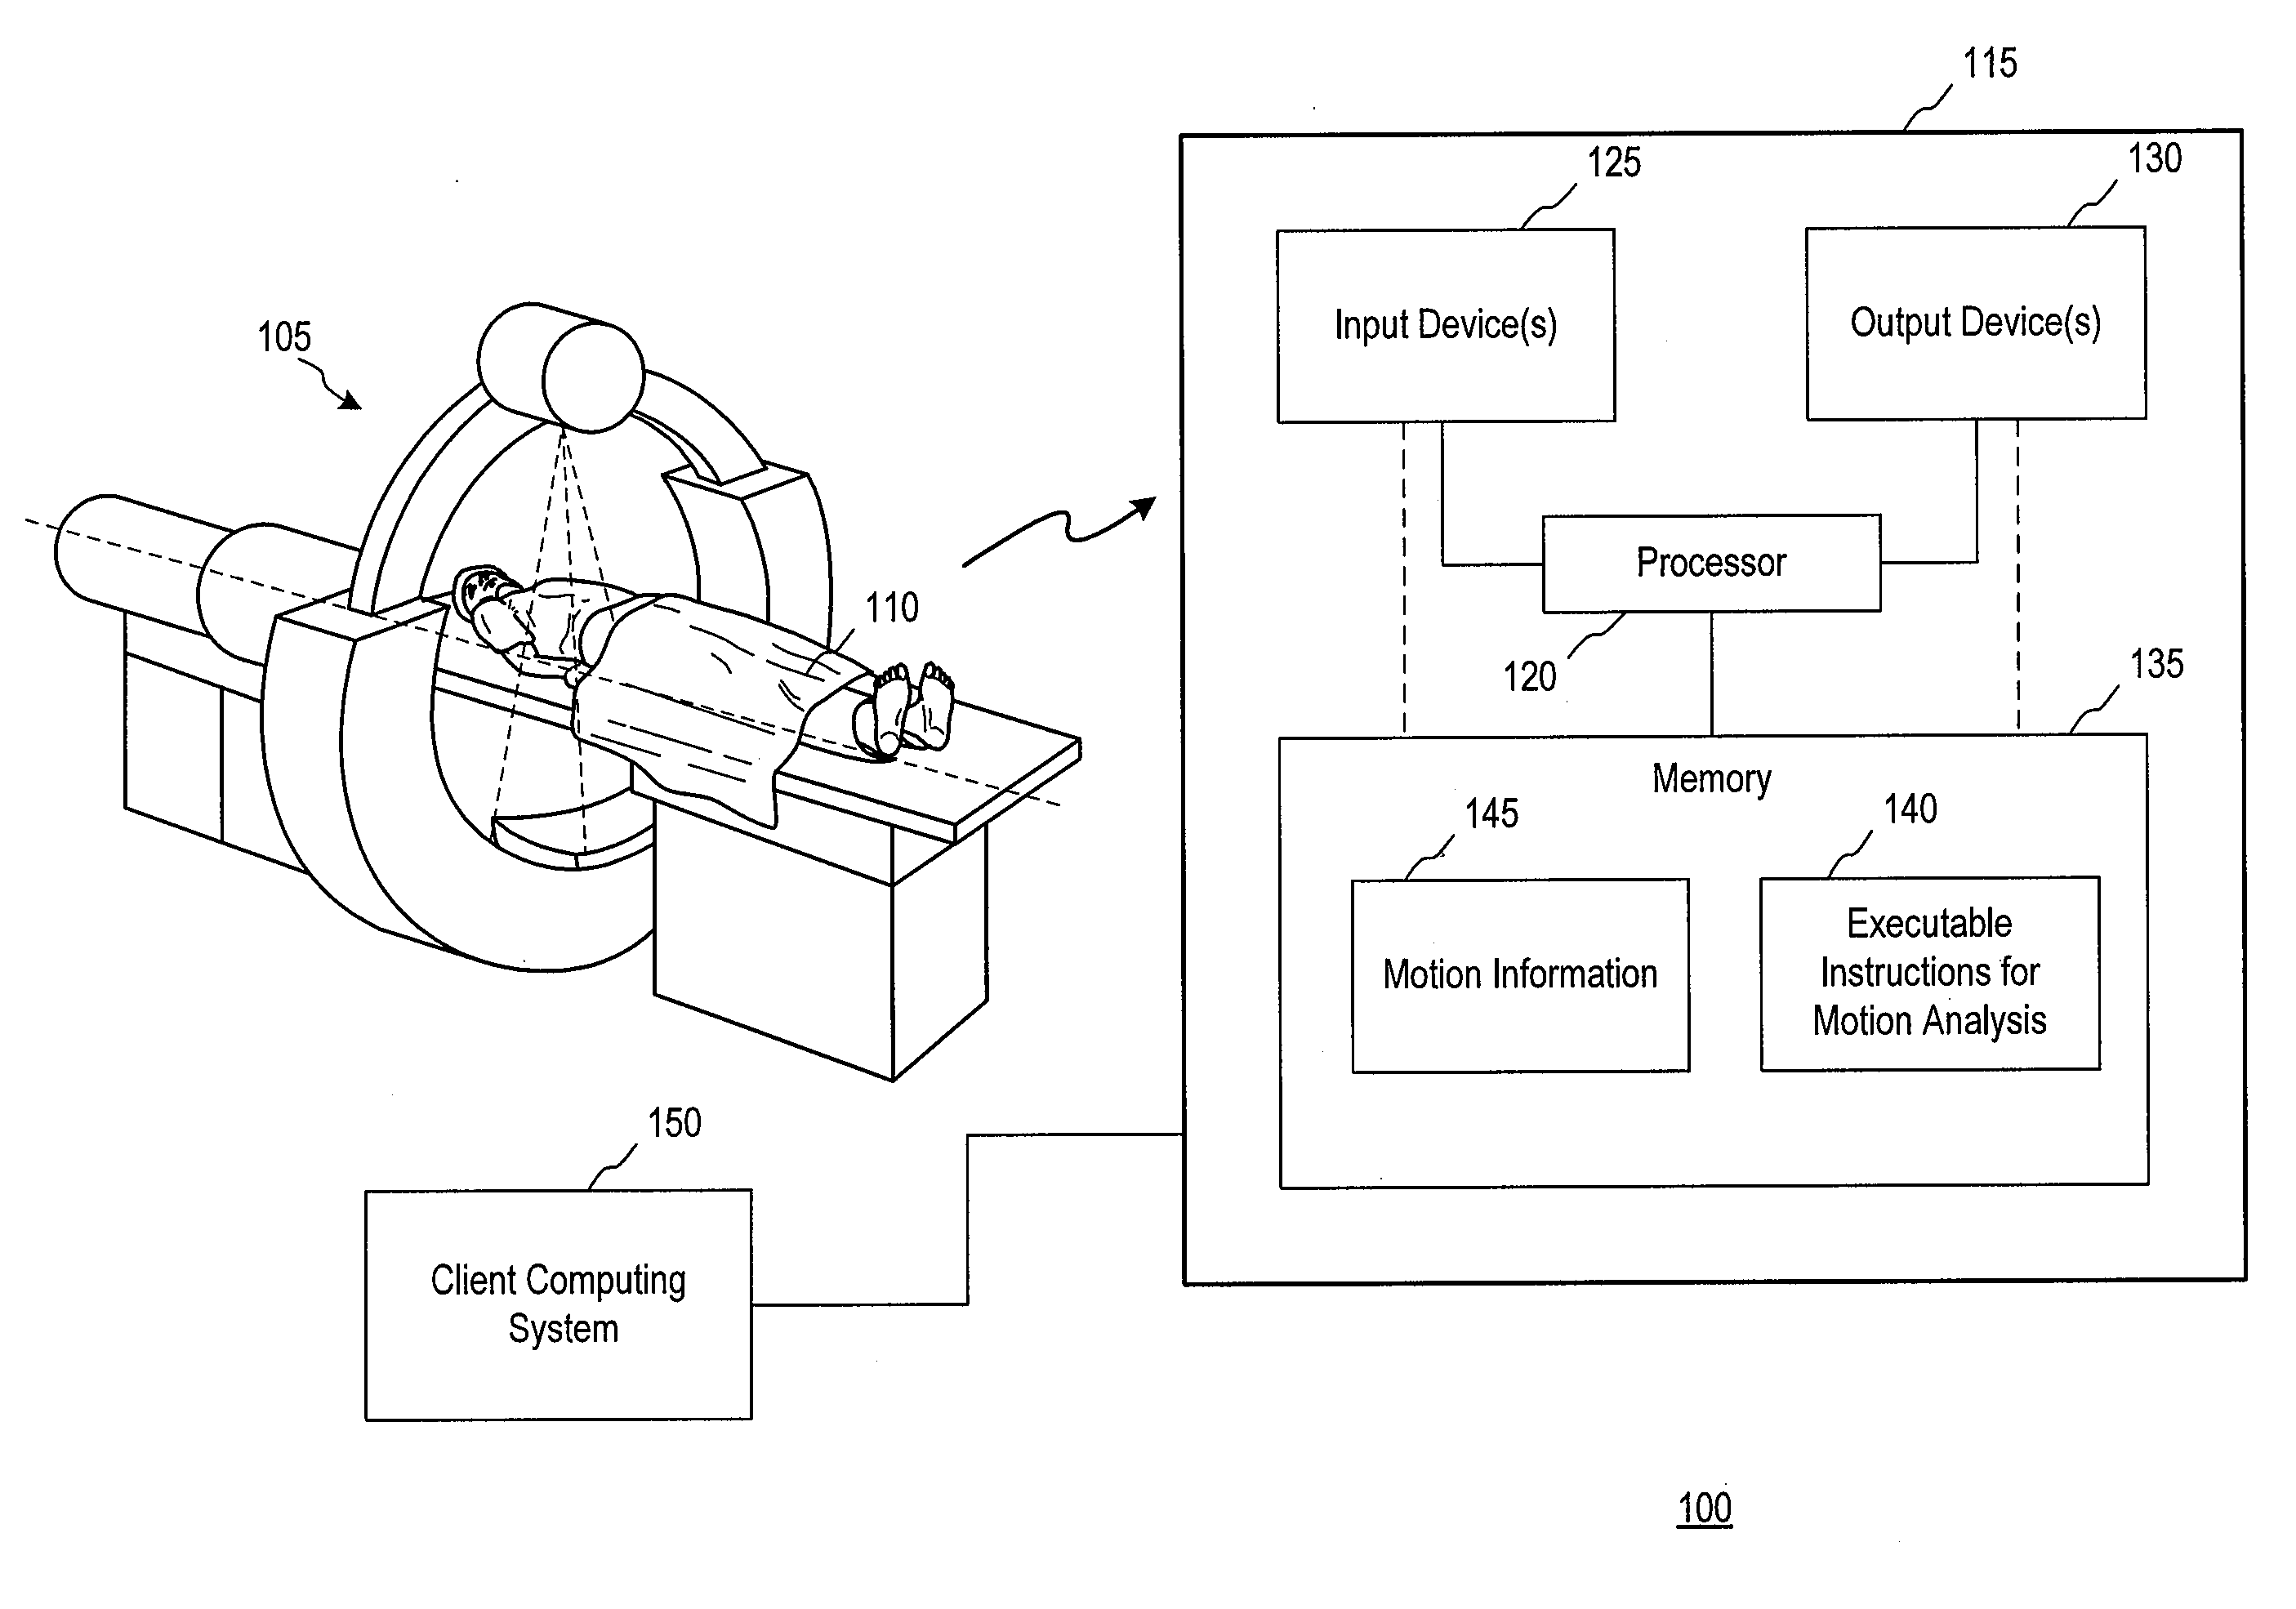 Computer readable medium, systems and methods for improving medical image quality using motion information